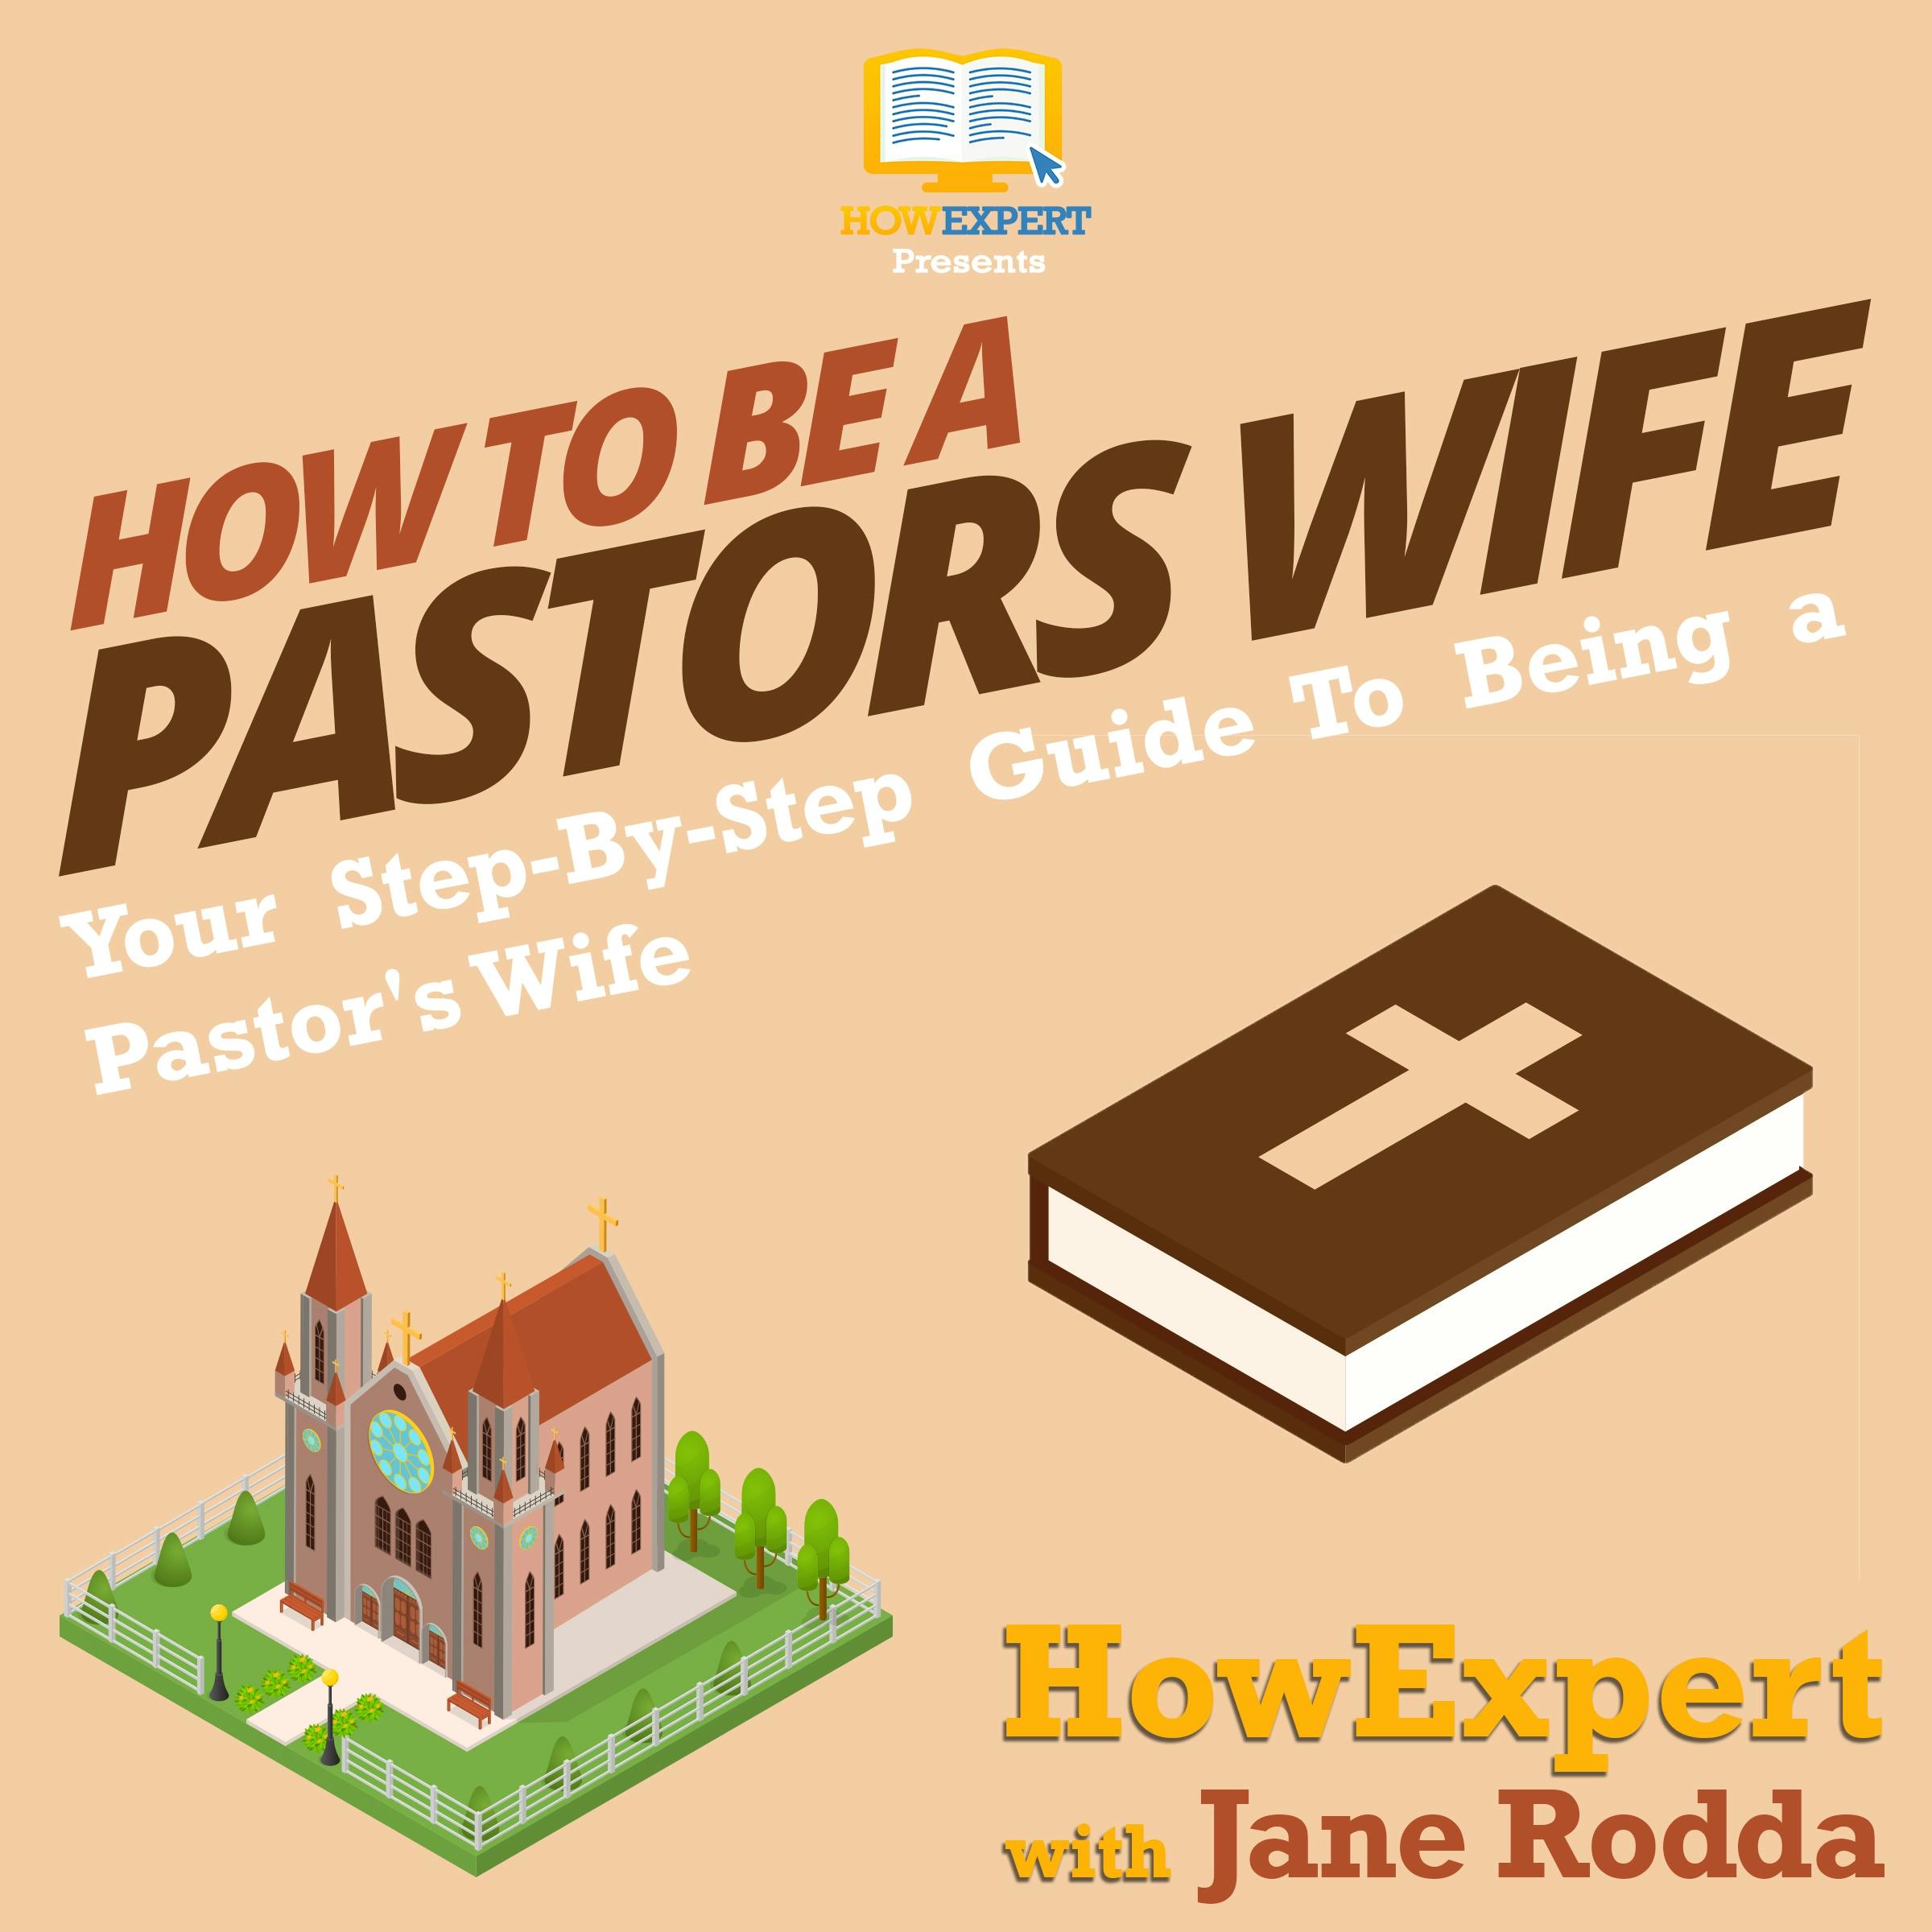 How To Be a Pastor's Wife: Your Step By Step Guide To Being a Pastor's Wife - undefined